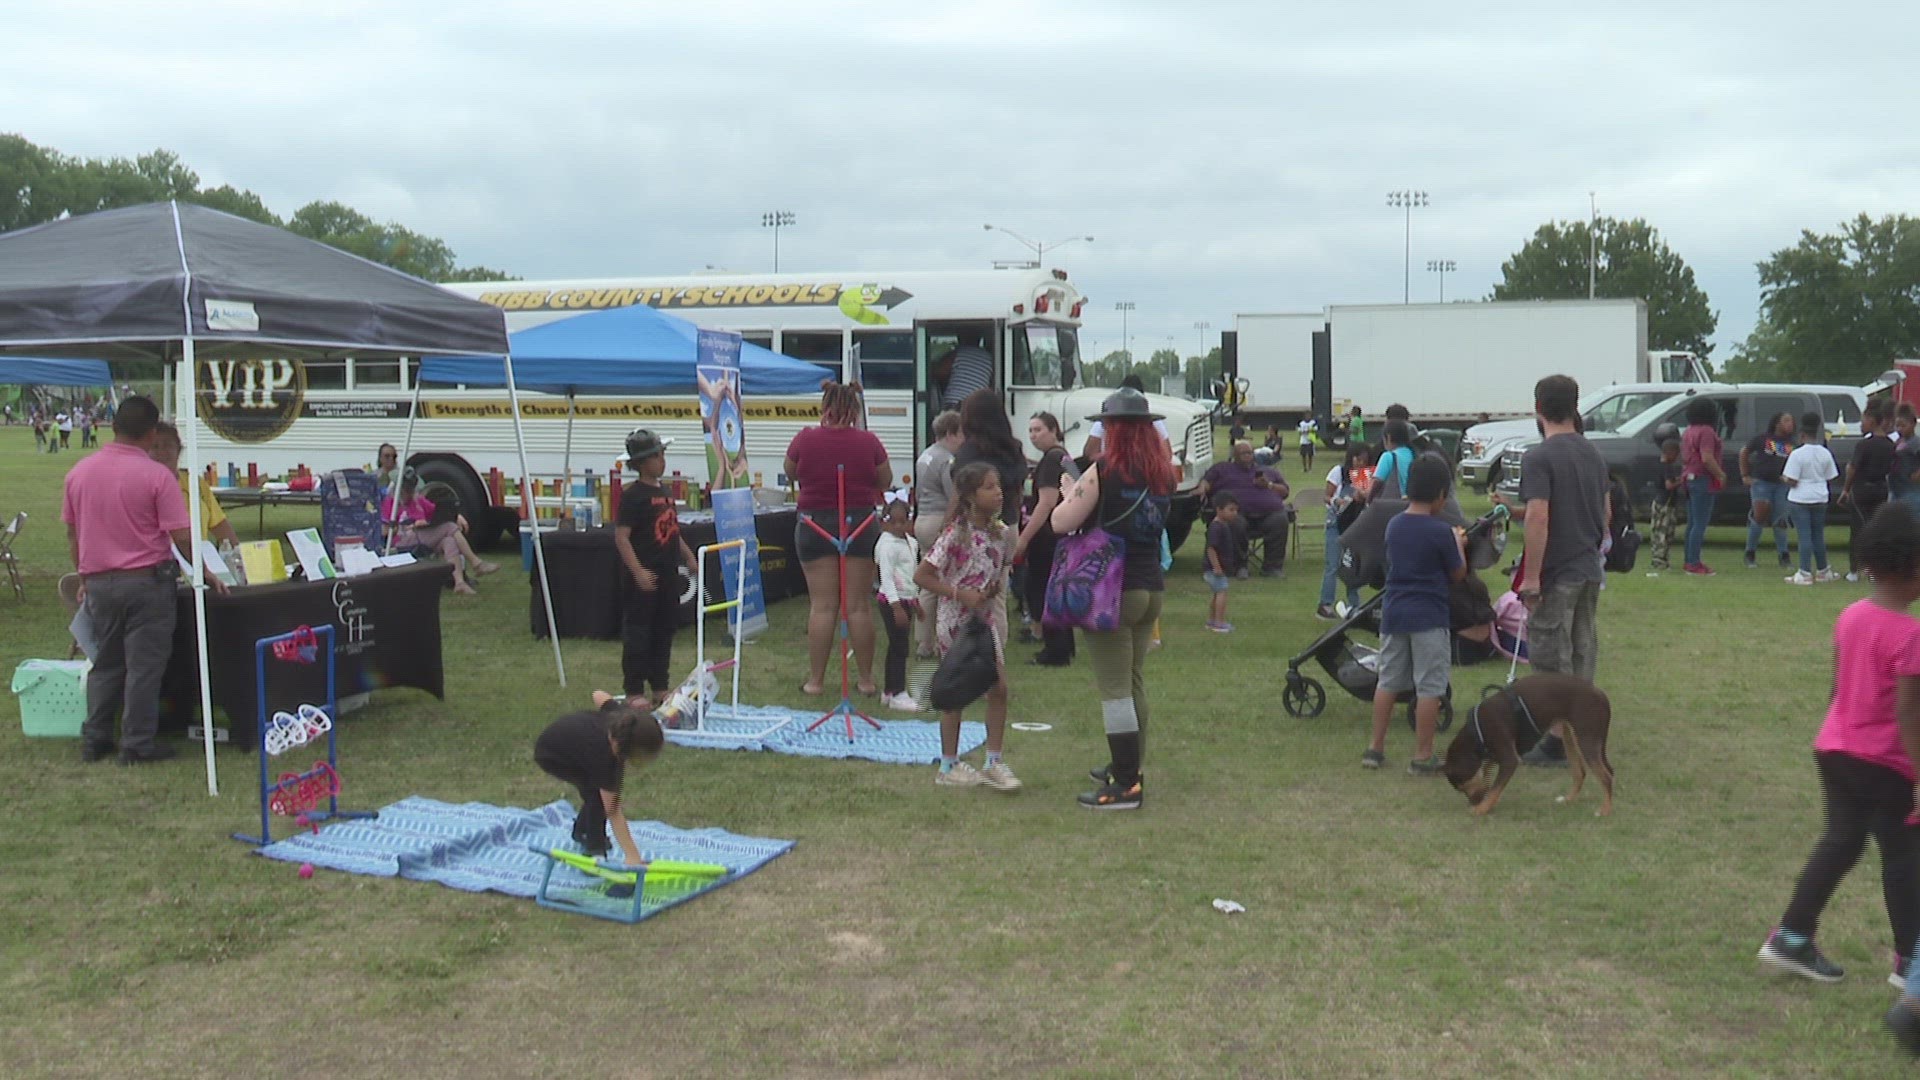 The school district says they hosted this event to get kids excited about finishing up the school year after all their hard work they've put in.